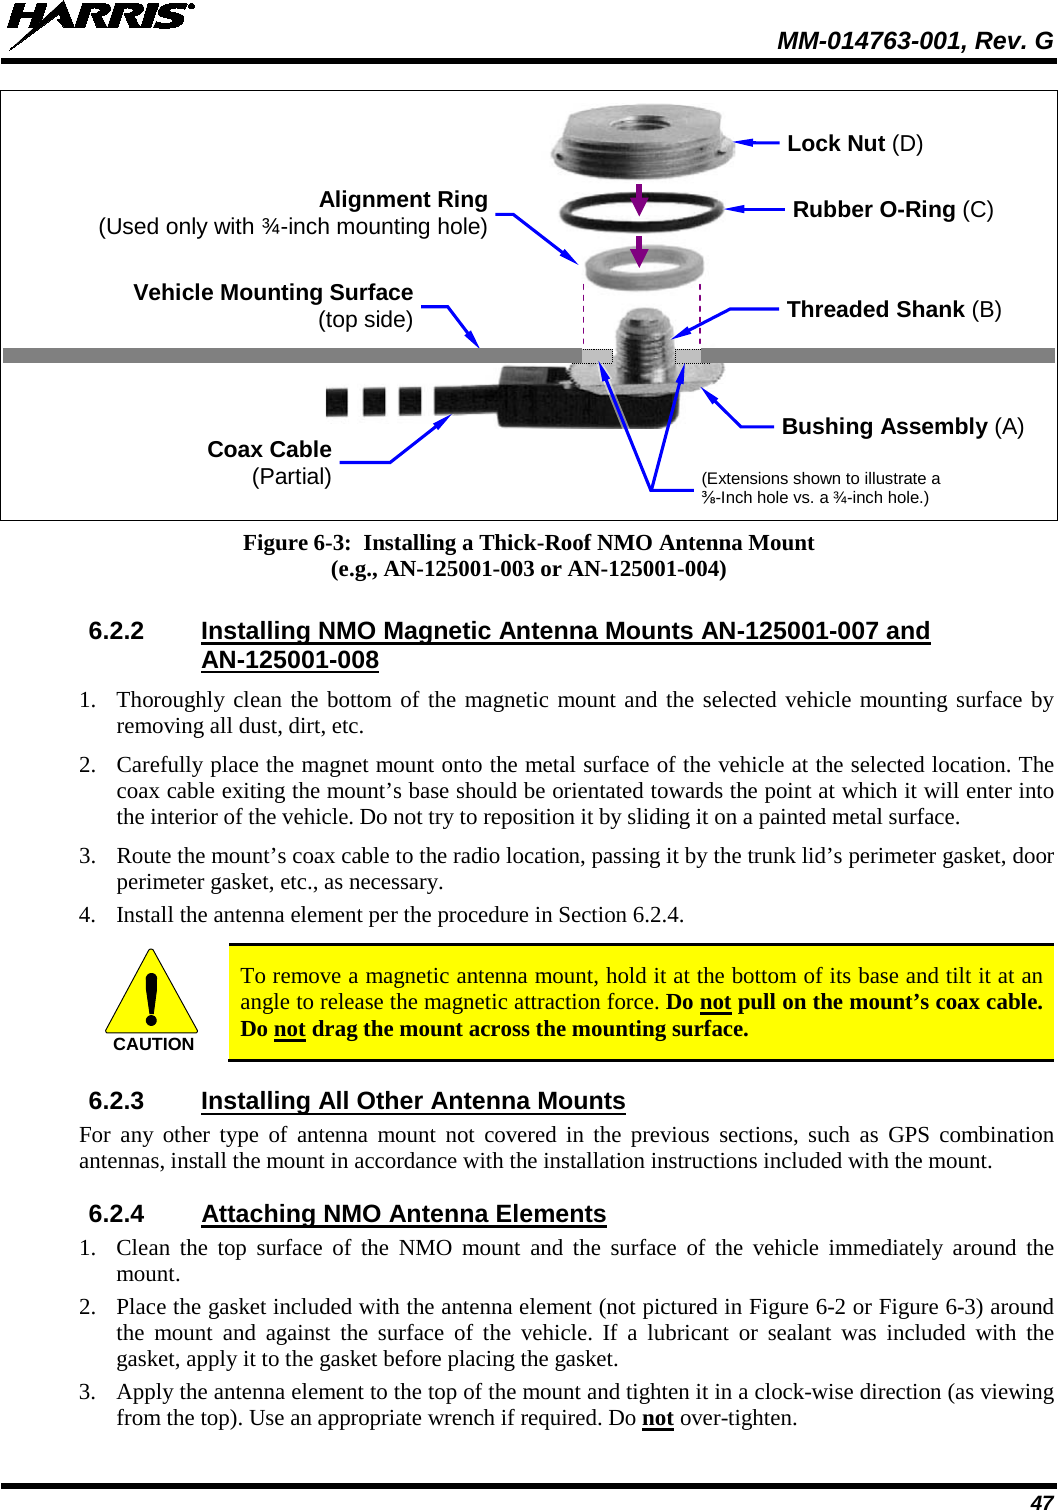  MM-014763-001, Rev. G 47     Figure 6-3:  Installing a Thick-Roof NMO Antenna Mount (e.g., AN-125001-003 or AN-125001-004)  6.2.2 Installing NMO Magnetic Antenna Mounts AN-125001-007 and AN-125001-008 1. Thoroughly clean the bottom of the magnetic mount and the selected vehicle mounting surface by removing all dust, dirt, etc. 2. Carefully place the magnet mount onto the metal surface of the vehicle at the selected location. The coax cable exiting the mount’s base should be orientated towards the point at which it will enter into the interior of the vehicle. Do not try to reposition it by sliding it on a painted metal surface. 3. Route the mount’s coax cable to the radio location, passing it by the trunk lid’s perimeter gasket, door perimeter gasket, etc., as necessary. 4. Install the antenna element per the procedure in Section 6.2.4.   To remove a magnetic antenna mount, hold it at the bottom of its base and tilt it at an angle to release the magnetic attraction force. Do not pull on the mount’s coax cable. Do not drag the mount across the mounting surface. 6.2.3 Installing All Other Antenna Mounts For any other type of antenna mount not covered in the previous sections, such as GPS combination antennas, install the mount in accordance with the installation instructions included with the mount. 6.2.4 Attaching NMO Antenna Elements 1. Clean the top surface of the NMO mount and the surface of the vehicle immediately  around the mount. 2. Place the gasket included with the antenna element (not pictured in Figure 6-2 or Figure 6-3) around the mount and against the surface of the vehicle. If a lubricant or sealant was included with the gasket, apply it to the gasket before placing the gasket. 3. Apply the antenna element to the top of the mount and tighten it in a clock-wise direction (as viewing from the top). Use an appropriate wrench if required. Do not over-tighten. CAUTIONCoax Cable (Partial) Rubber O-Ring (C) Vehicle Mounting Surface (top side) Bushing Assembly (A) Lock Nut (D) Threaded Shank (B) Alignment Ring (Used only with ¾-inch mounting hole) (Extensions shown to illustrate a ⅜-Inch hole vs. a ¾-inch hole.)  